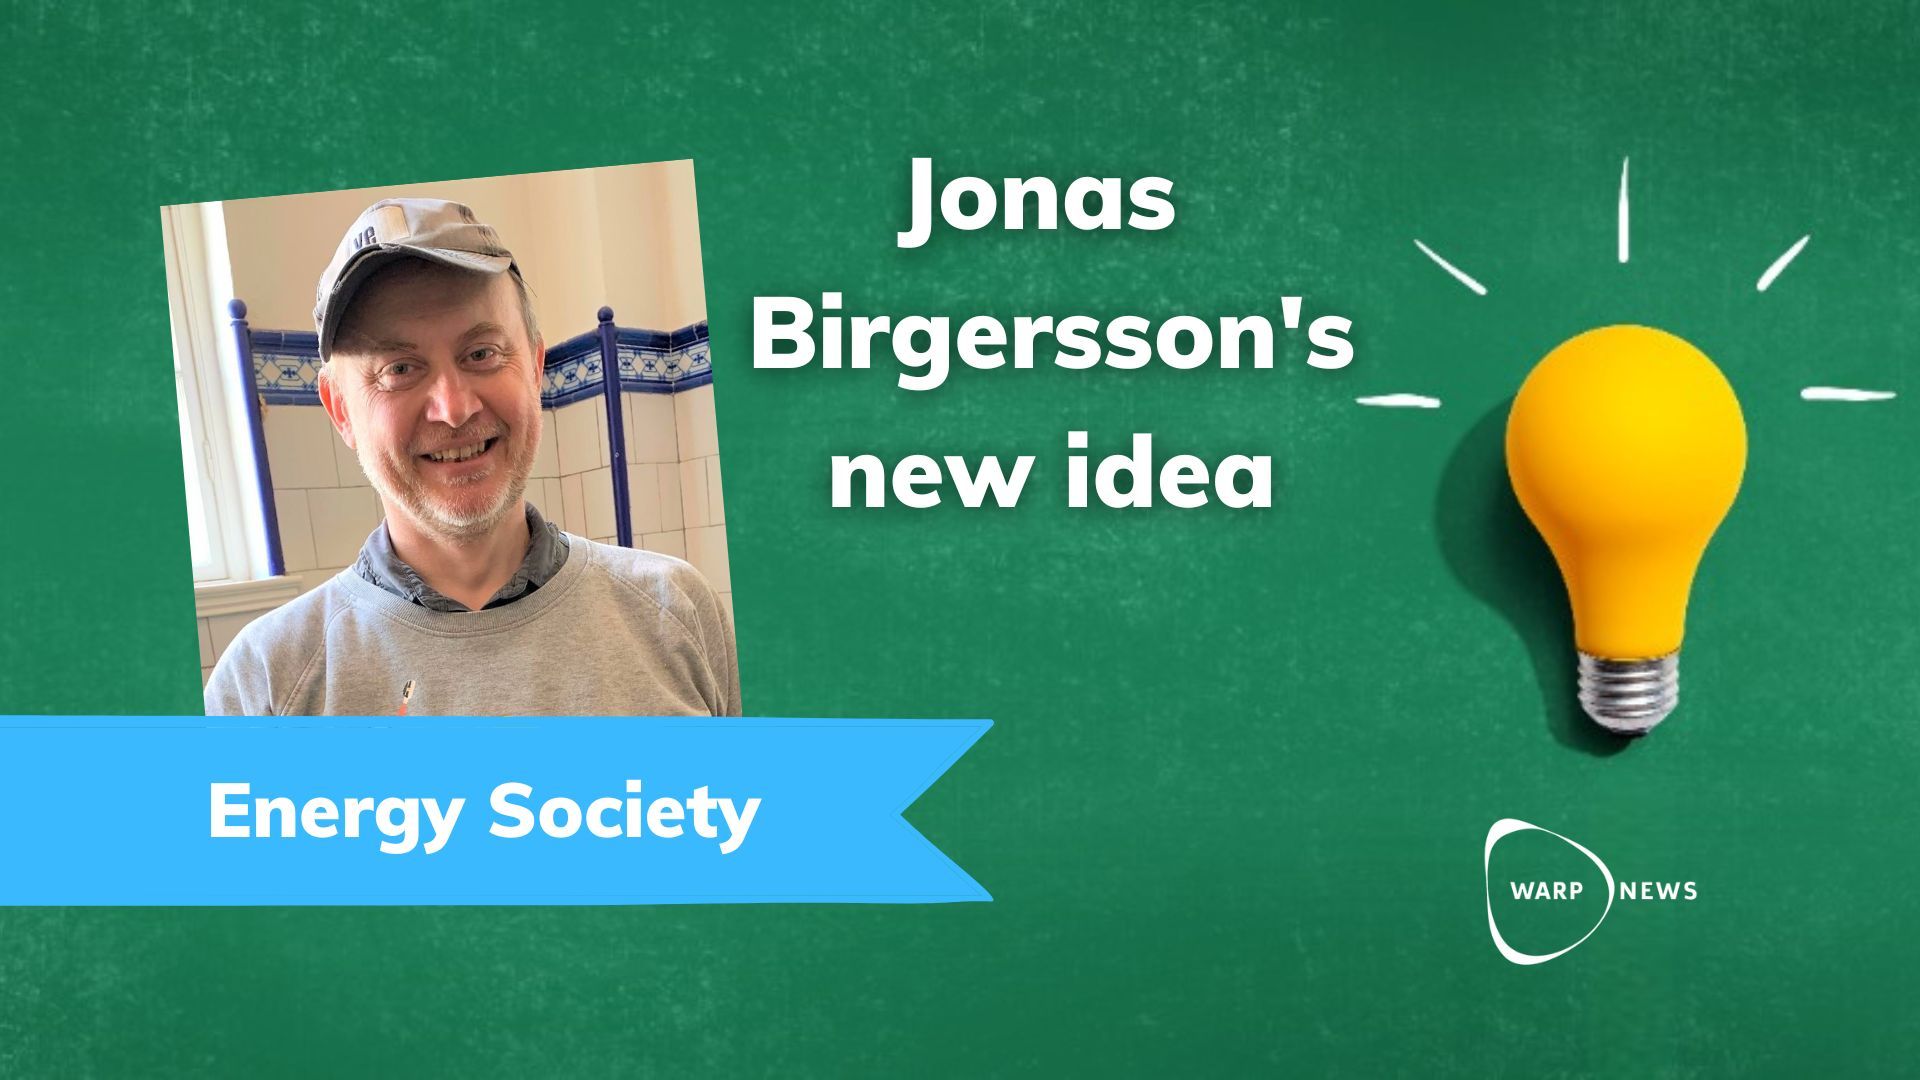 🔌 Jonas Birgersson: "All the electricity you need for a low, fixed fee"